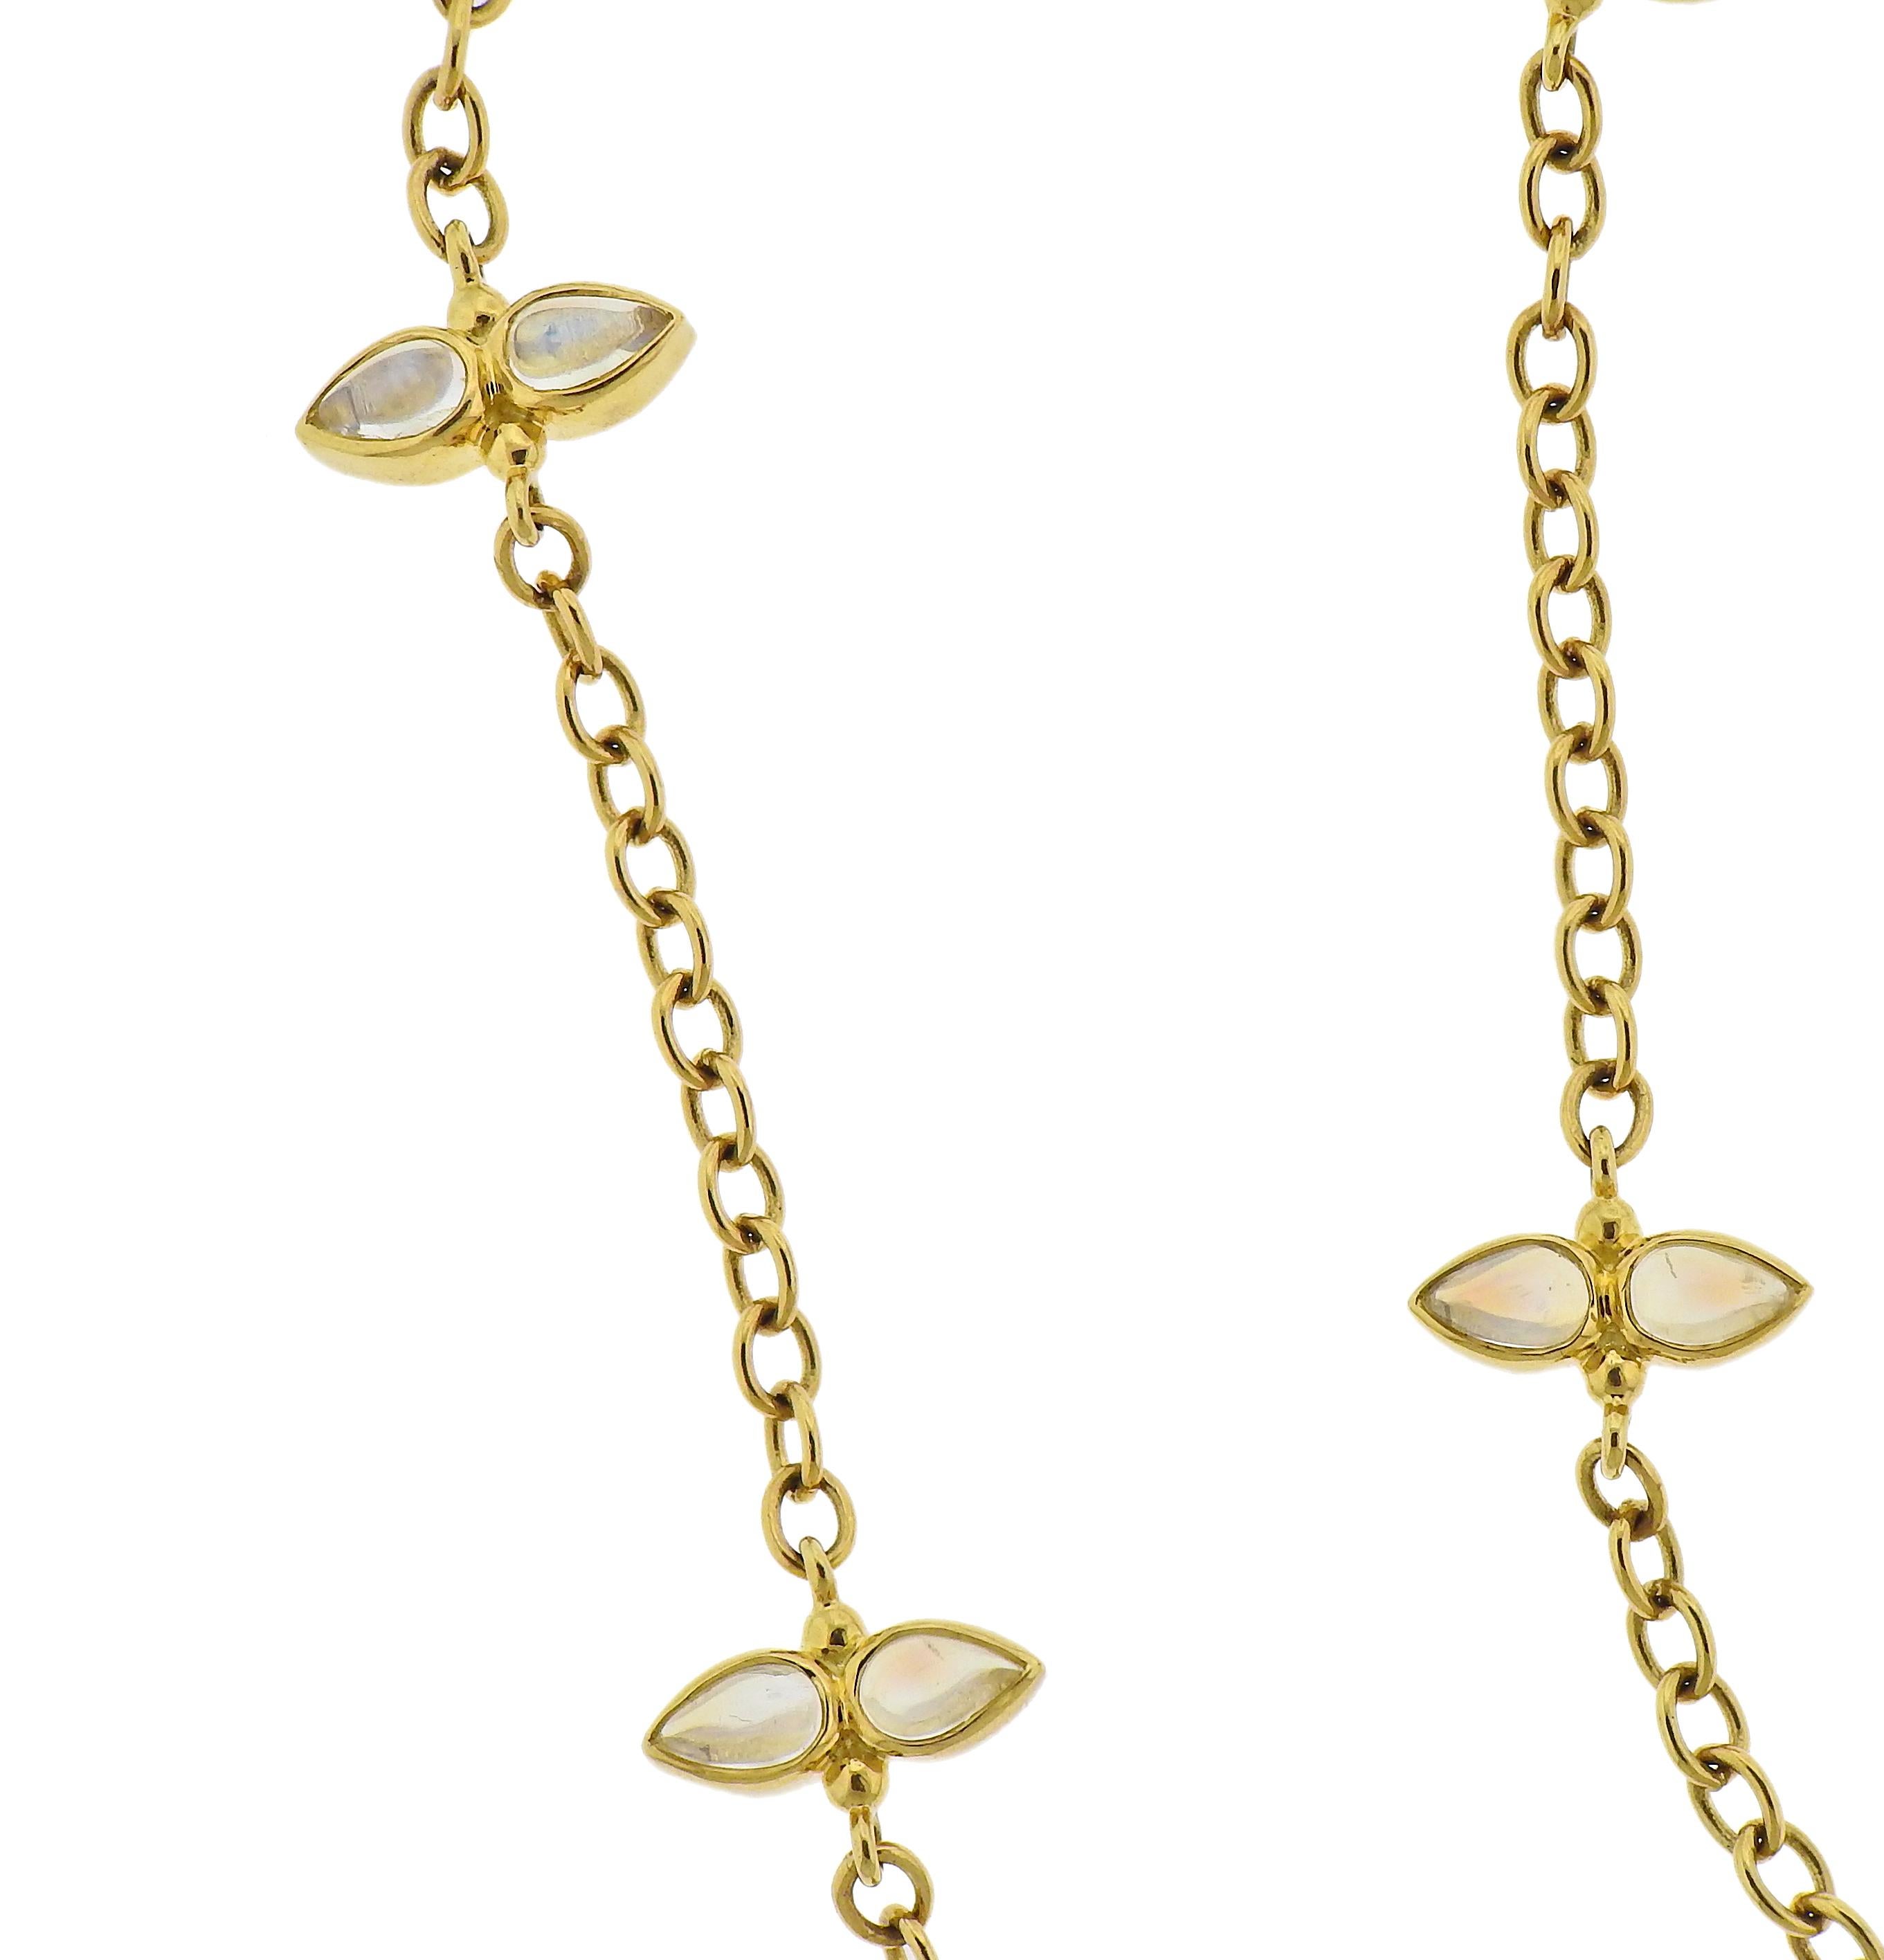 Long 18k gold station necklace by Temple St. Clair , with moonstones. Necklace is 36.25